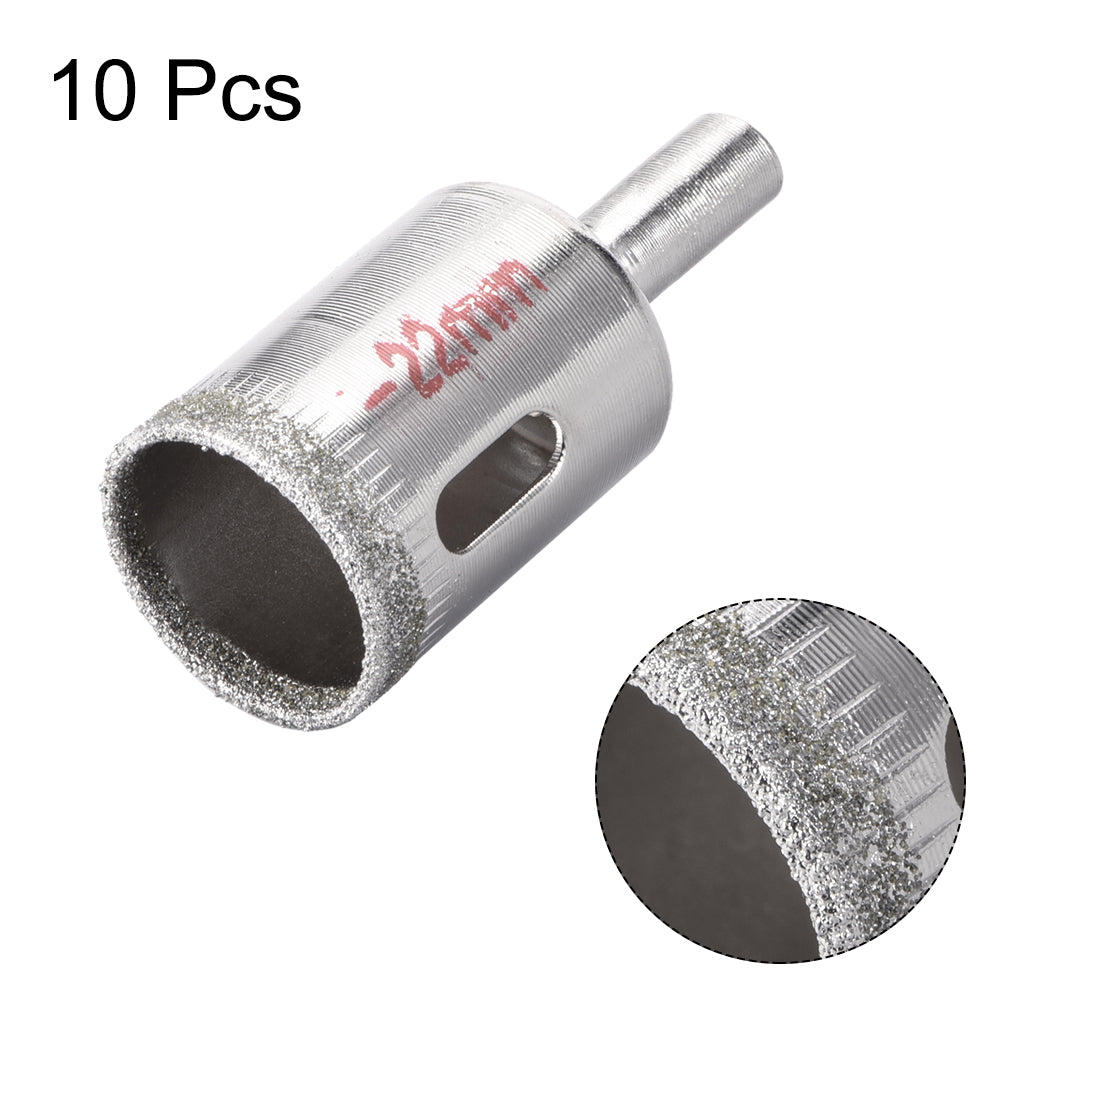 Uxcell Uxcell 22mm Diamond Drill Bits Hole Saws for Glass Ceramic Porcelain Tiles 10 Pcs